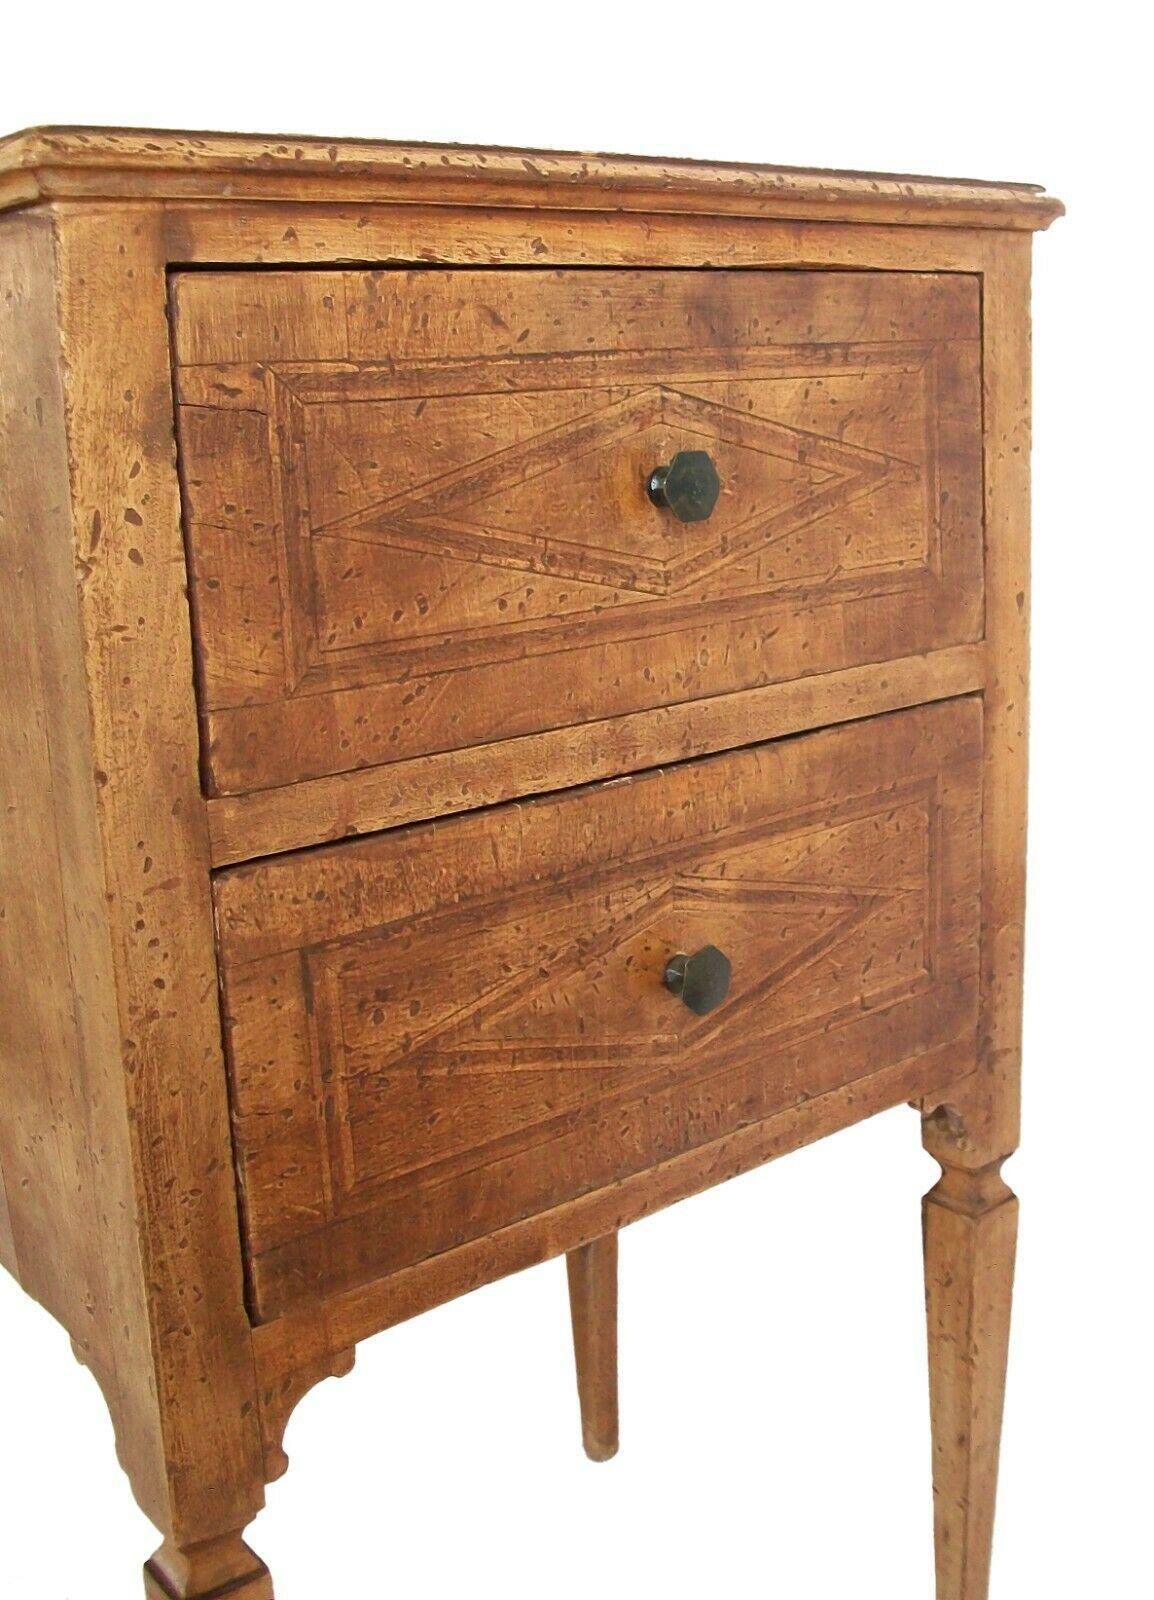 North Italian Antique Pair of Walnut Neoclassical Bedside Tables, Circa 1820 For Sale 3